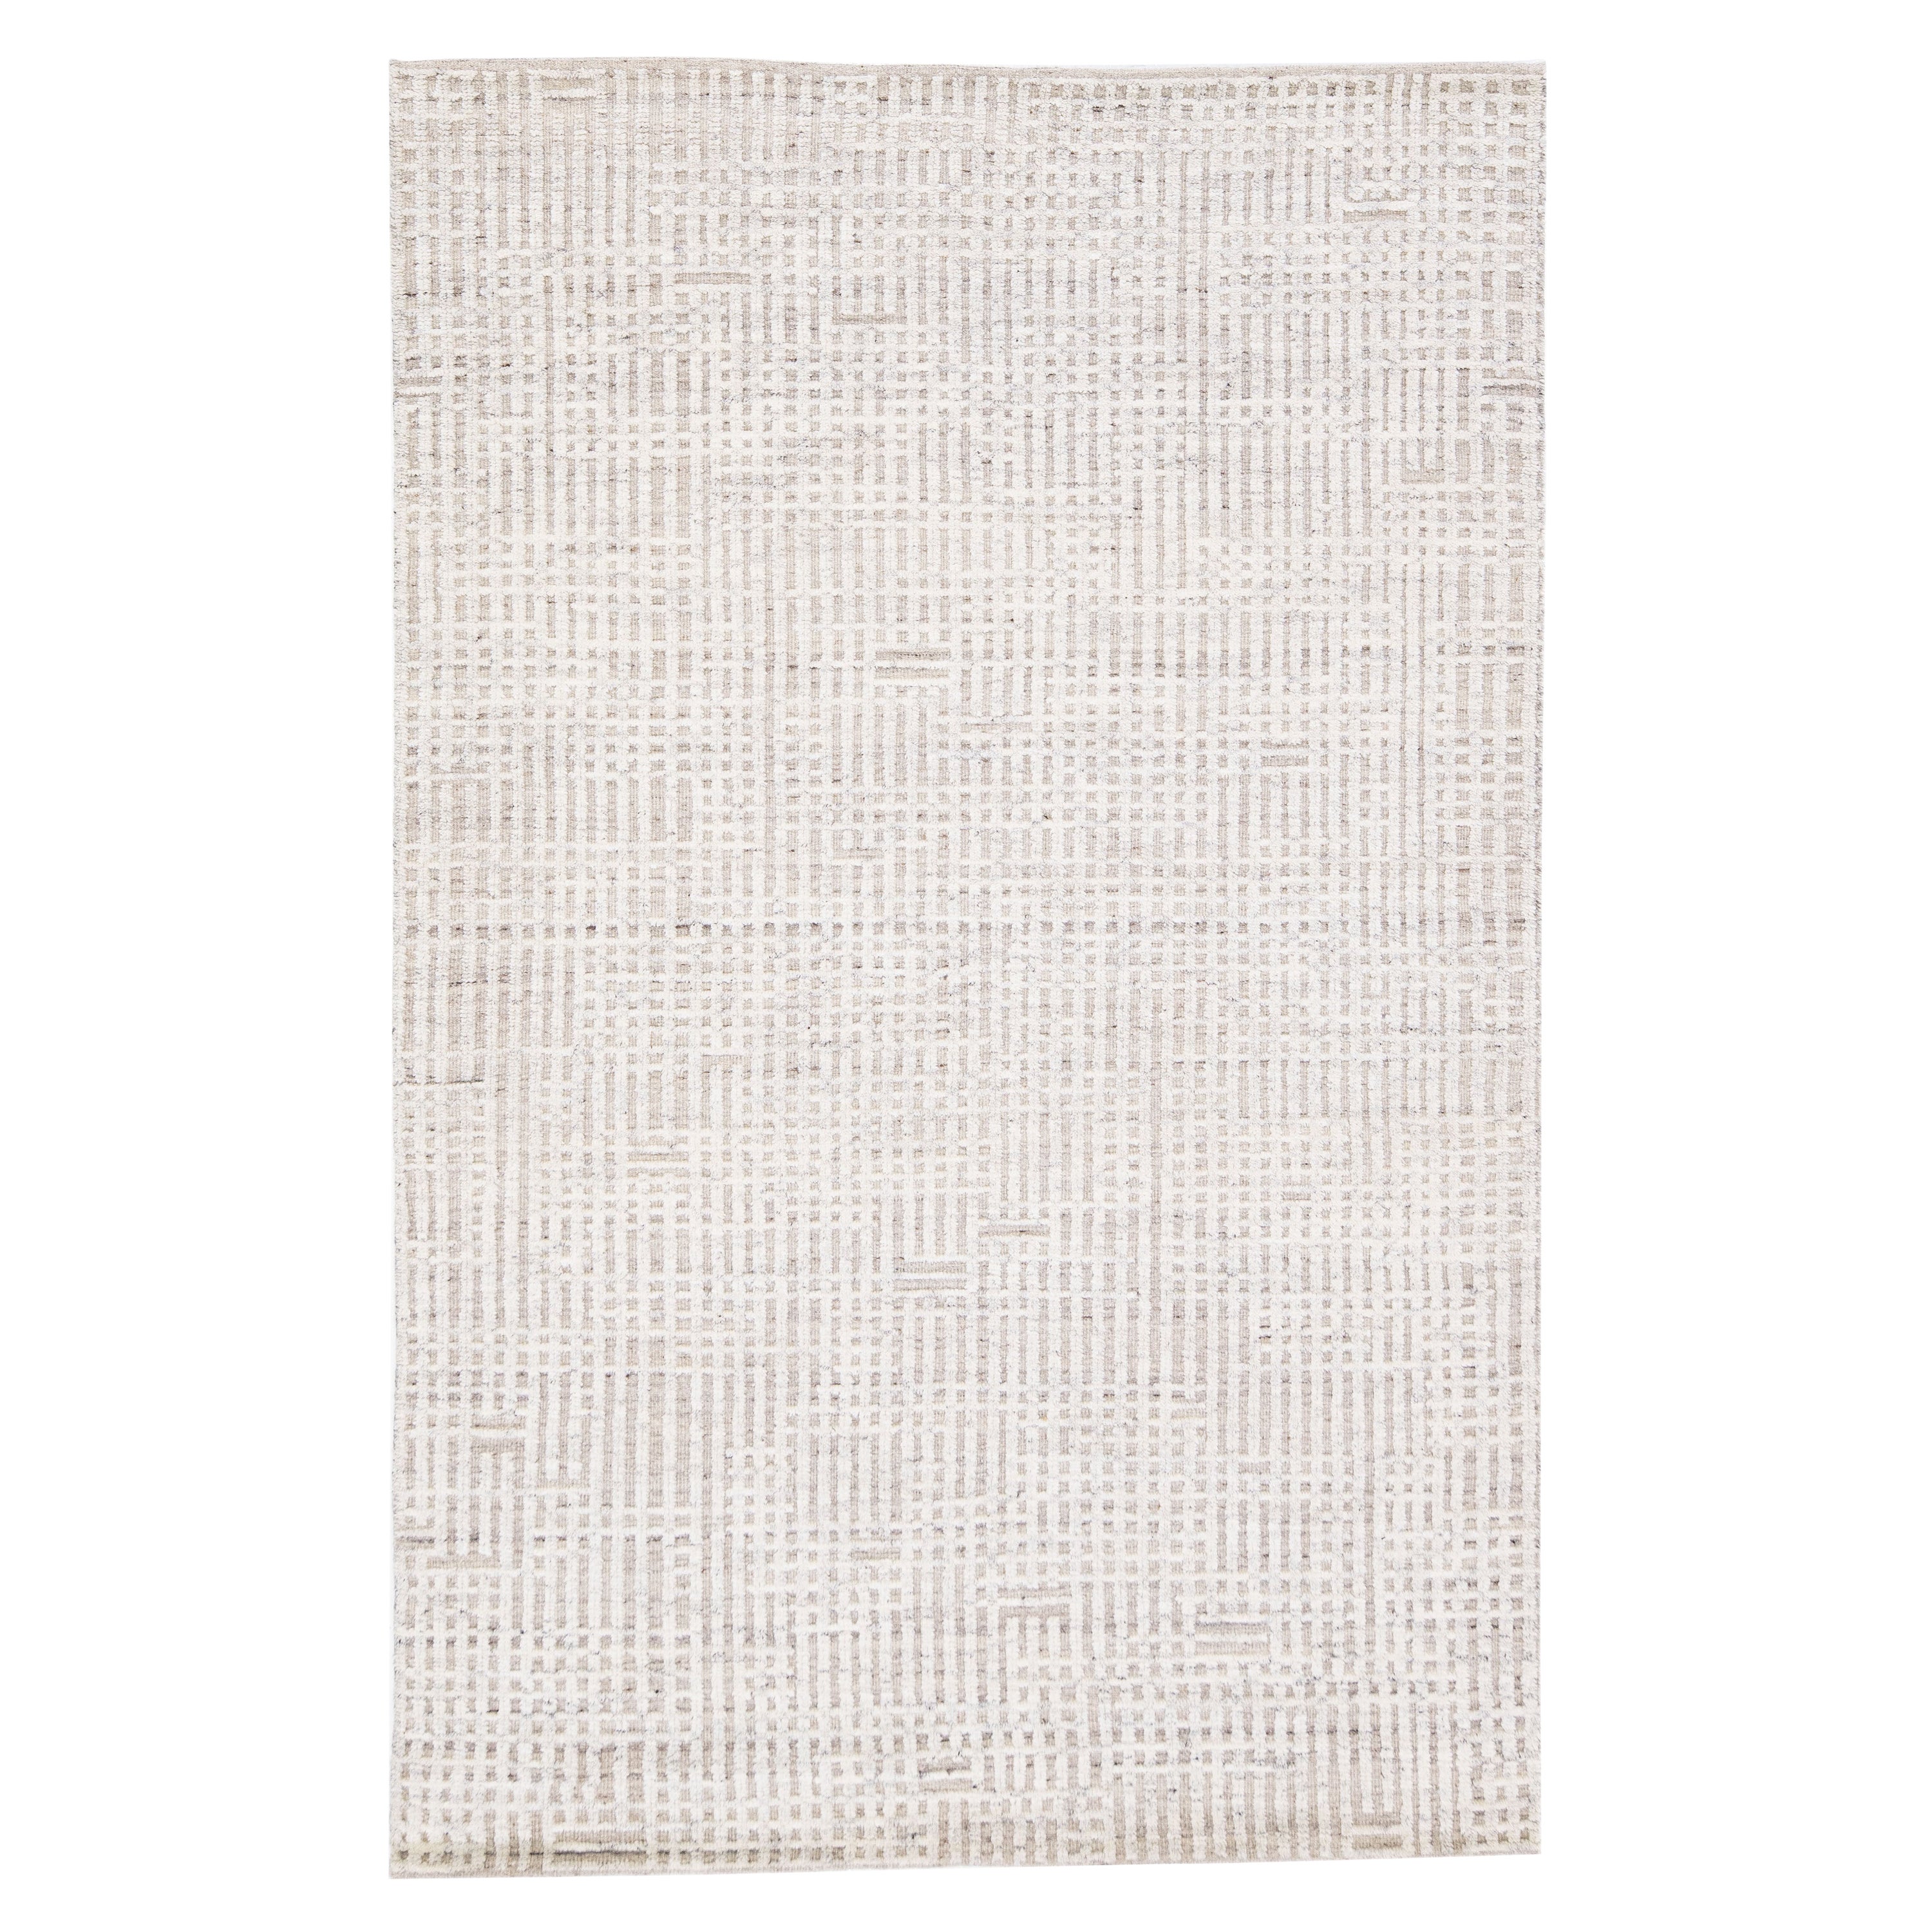 Modern Geometric Moroccan Style Scatter Wool Rug with Ivory Field by Apadana For Sale